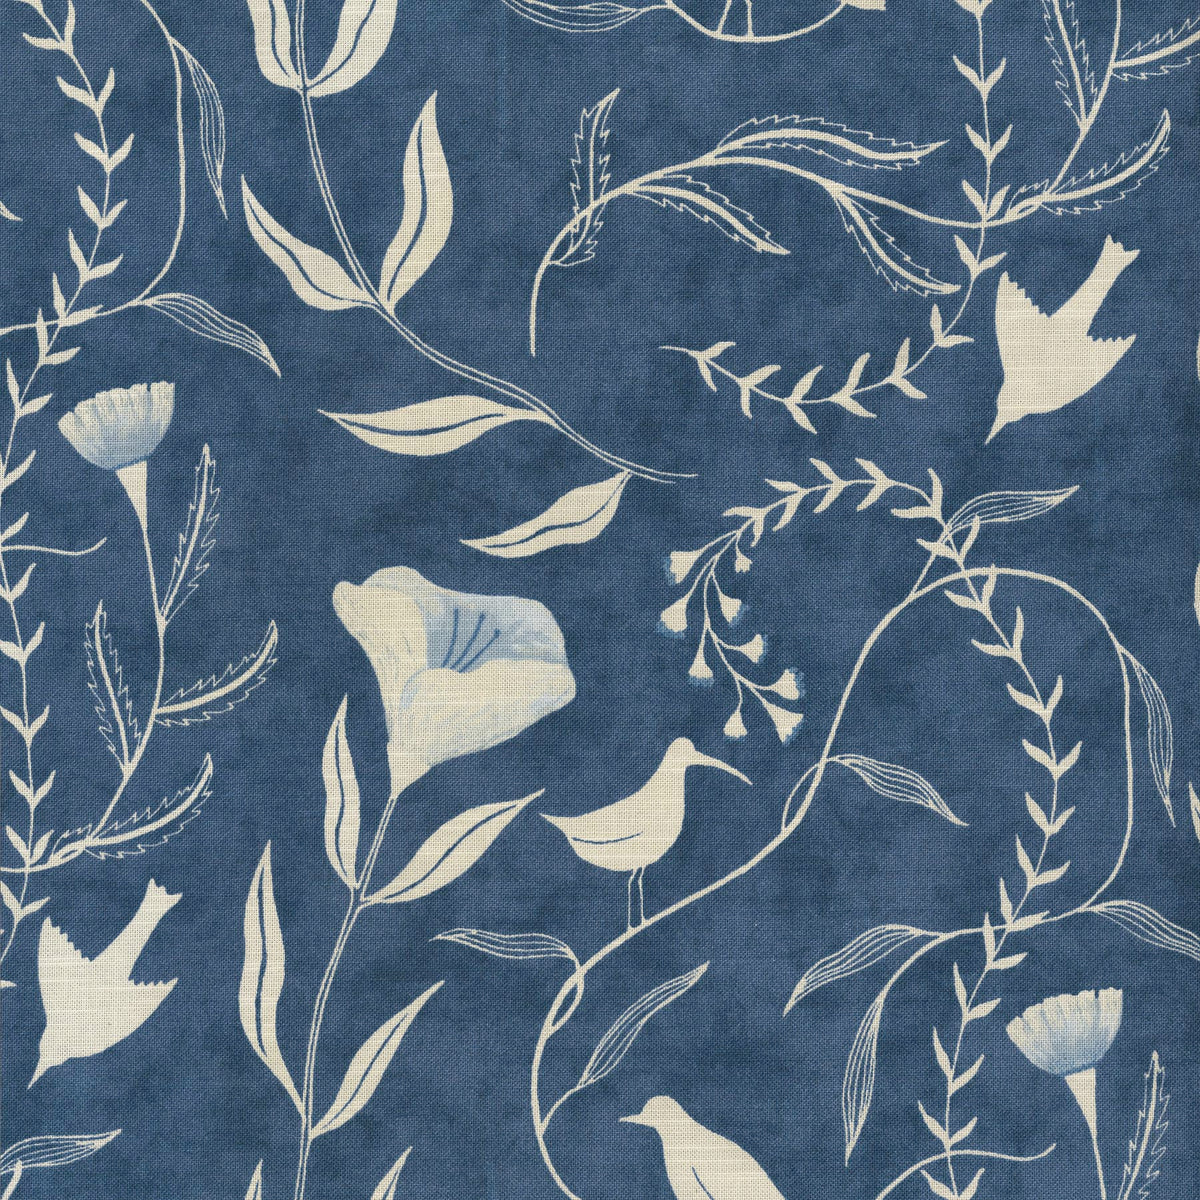 Bluebell Animal Prints Linen Drapery and Upholstery Fabric by The Yard